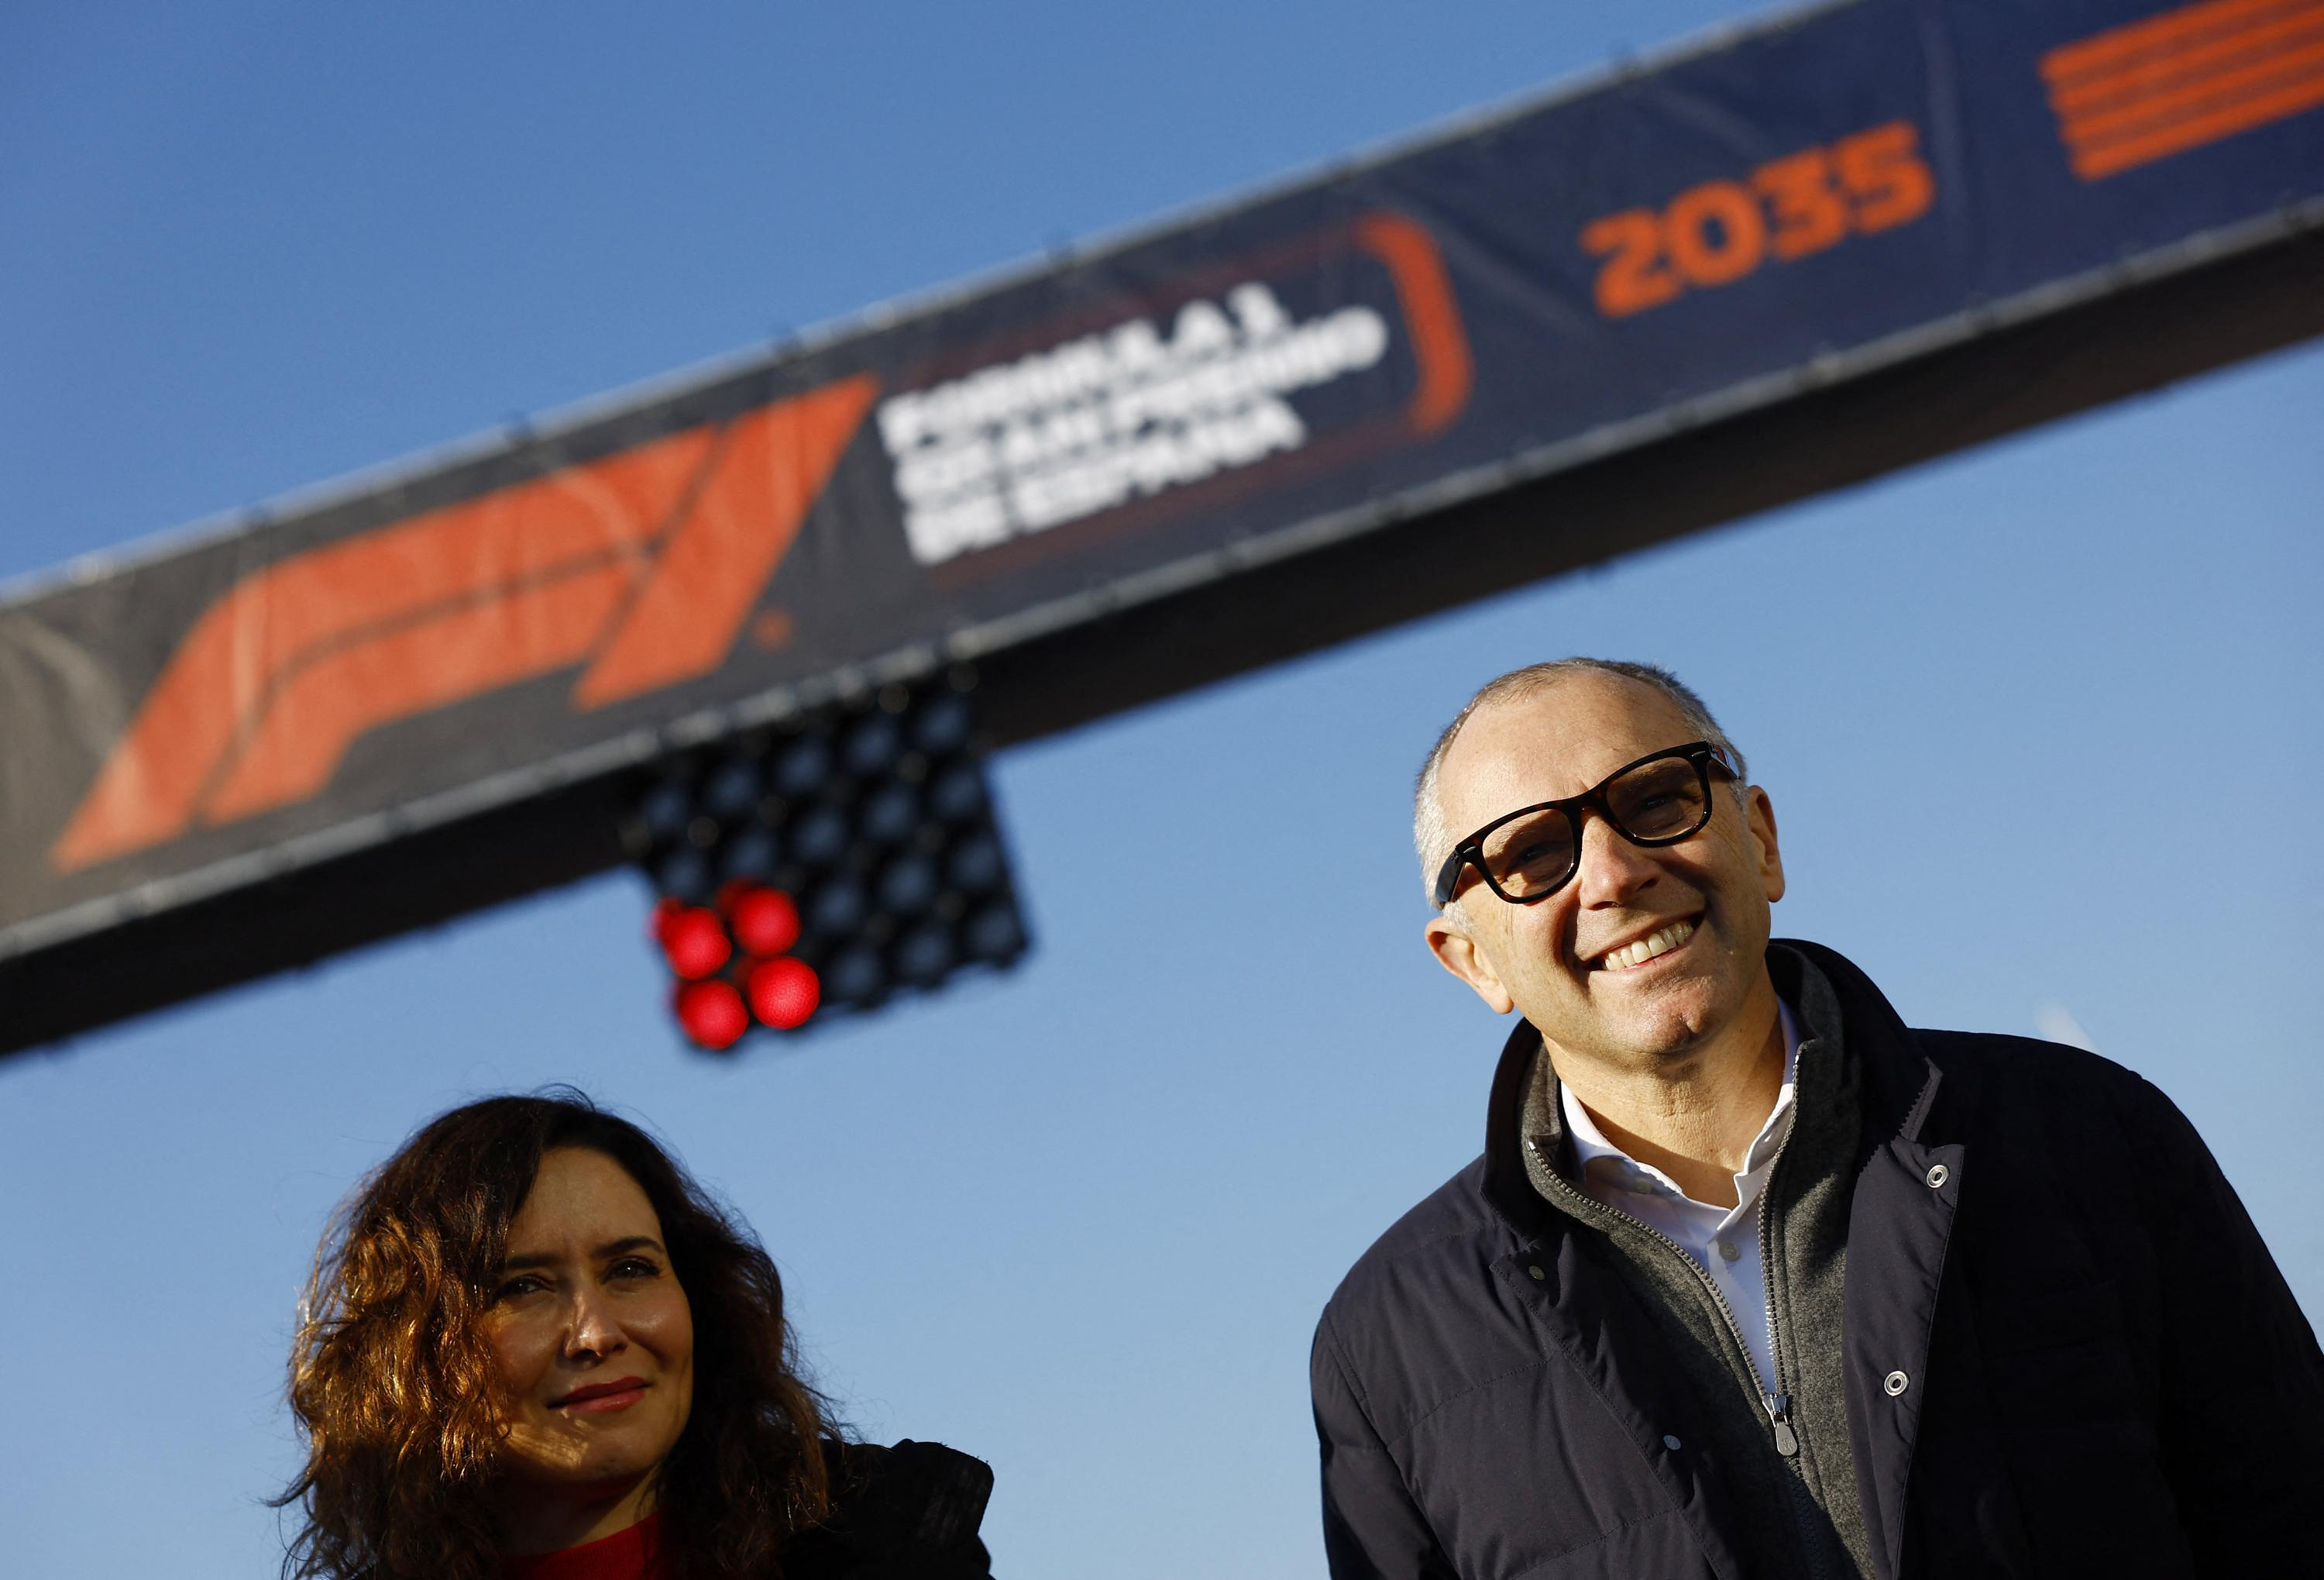 F1: Madrid will host a Grand Prix from 2026